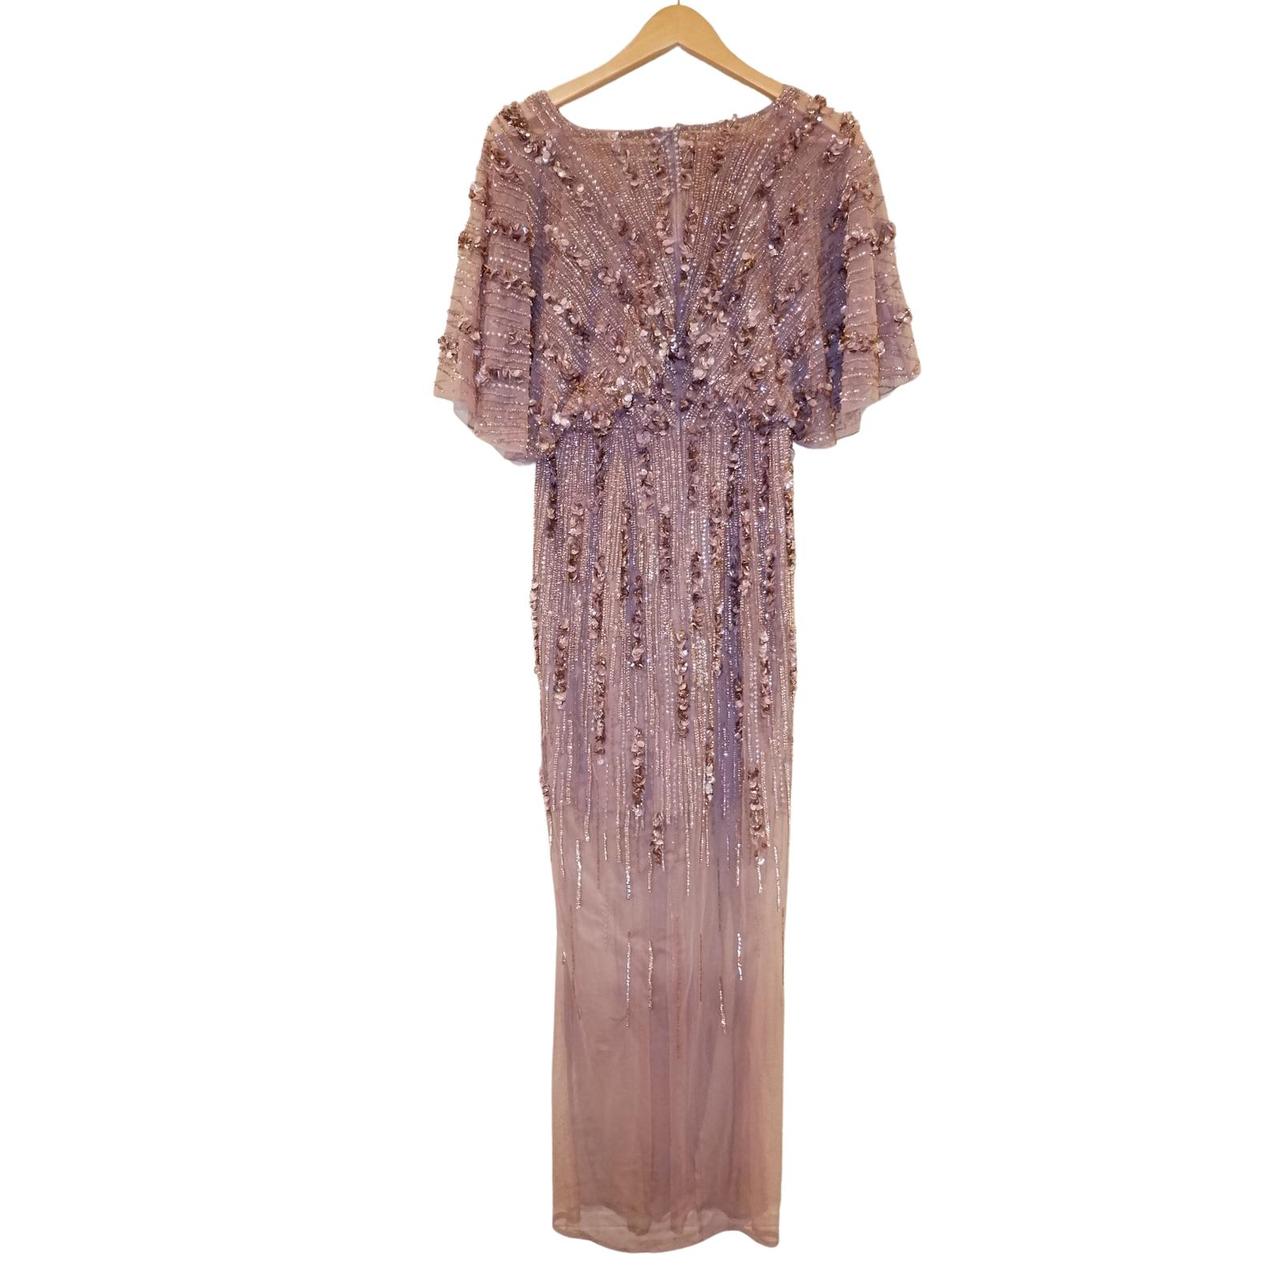 Product Image 2 - Aidan Mattox Embroidered V-Neck Gown
Color: